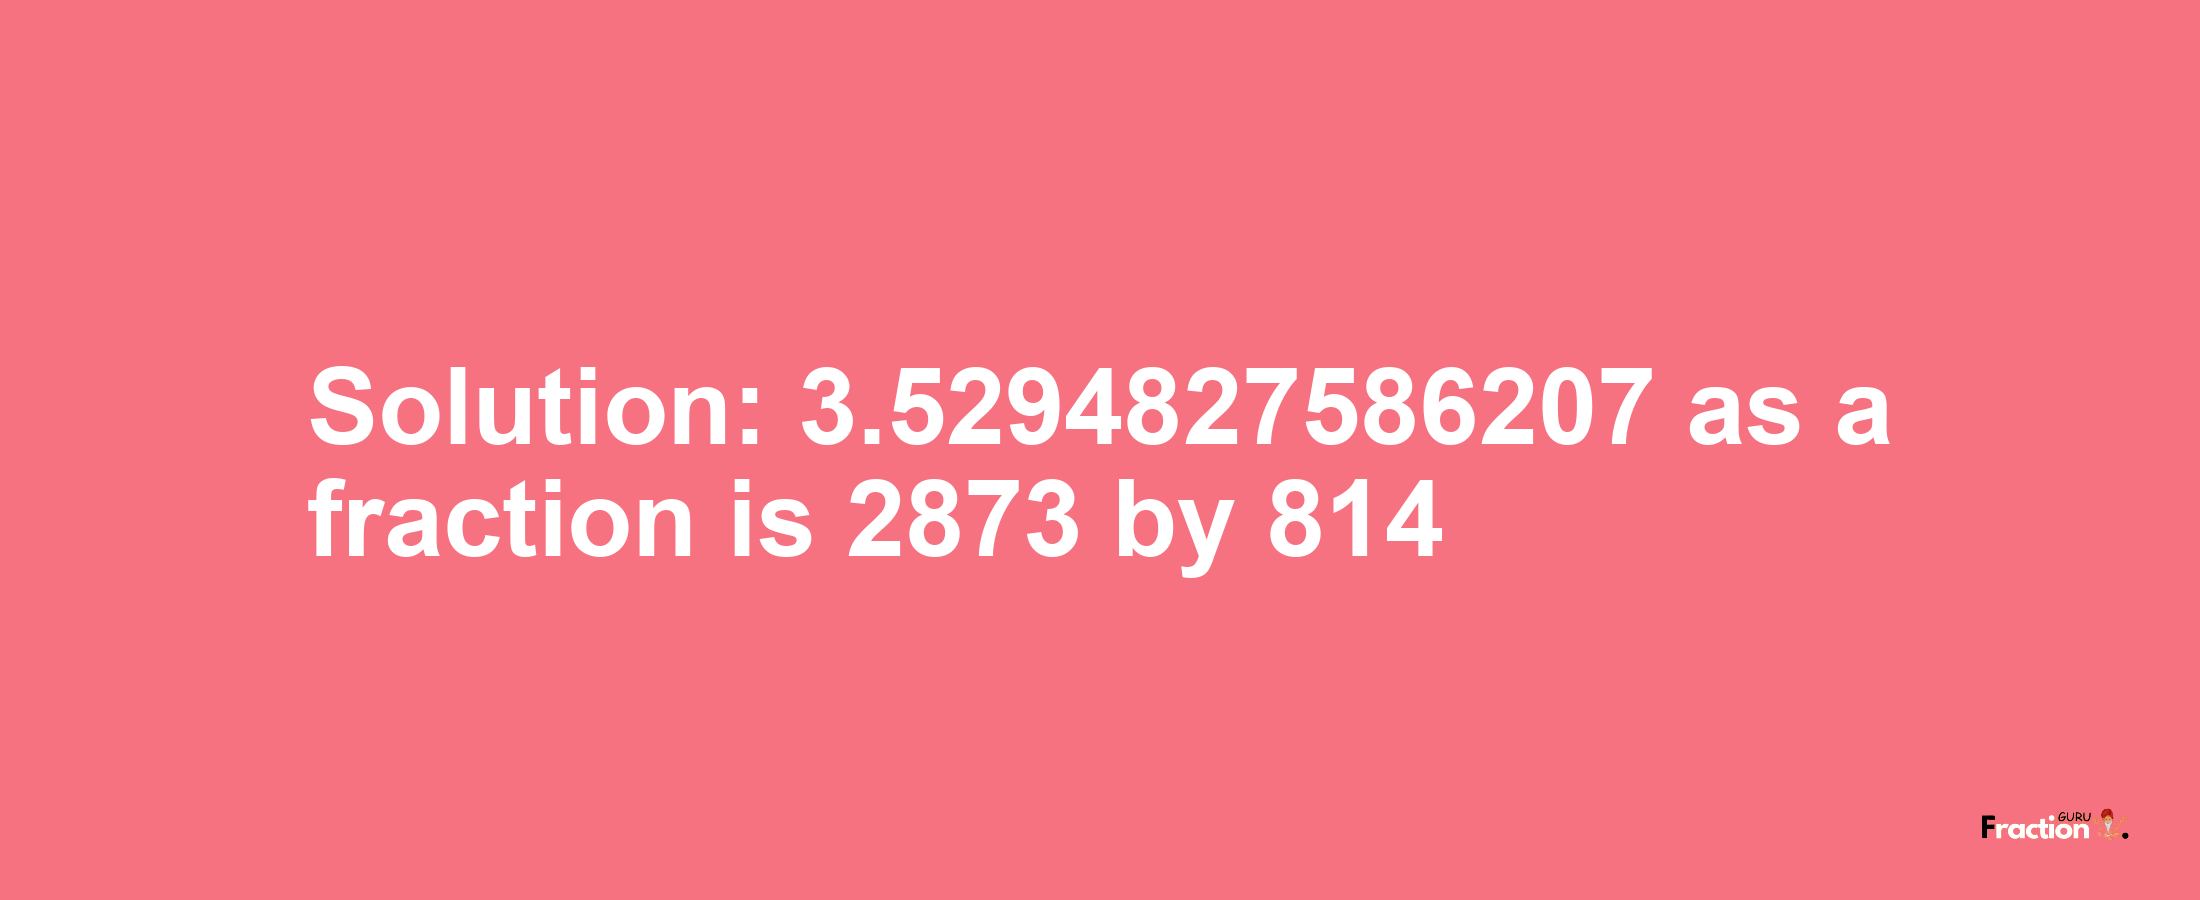 Solution:3.5294827586207 as a fraction is 2873/814